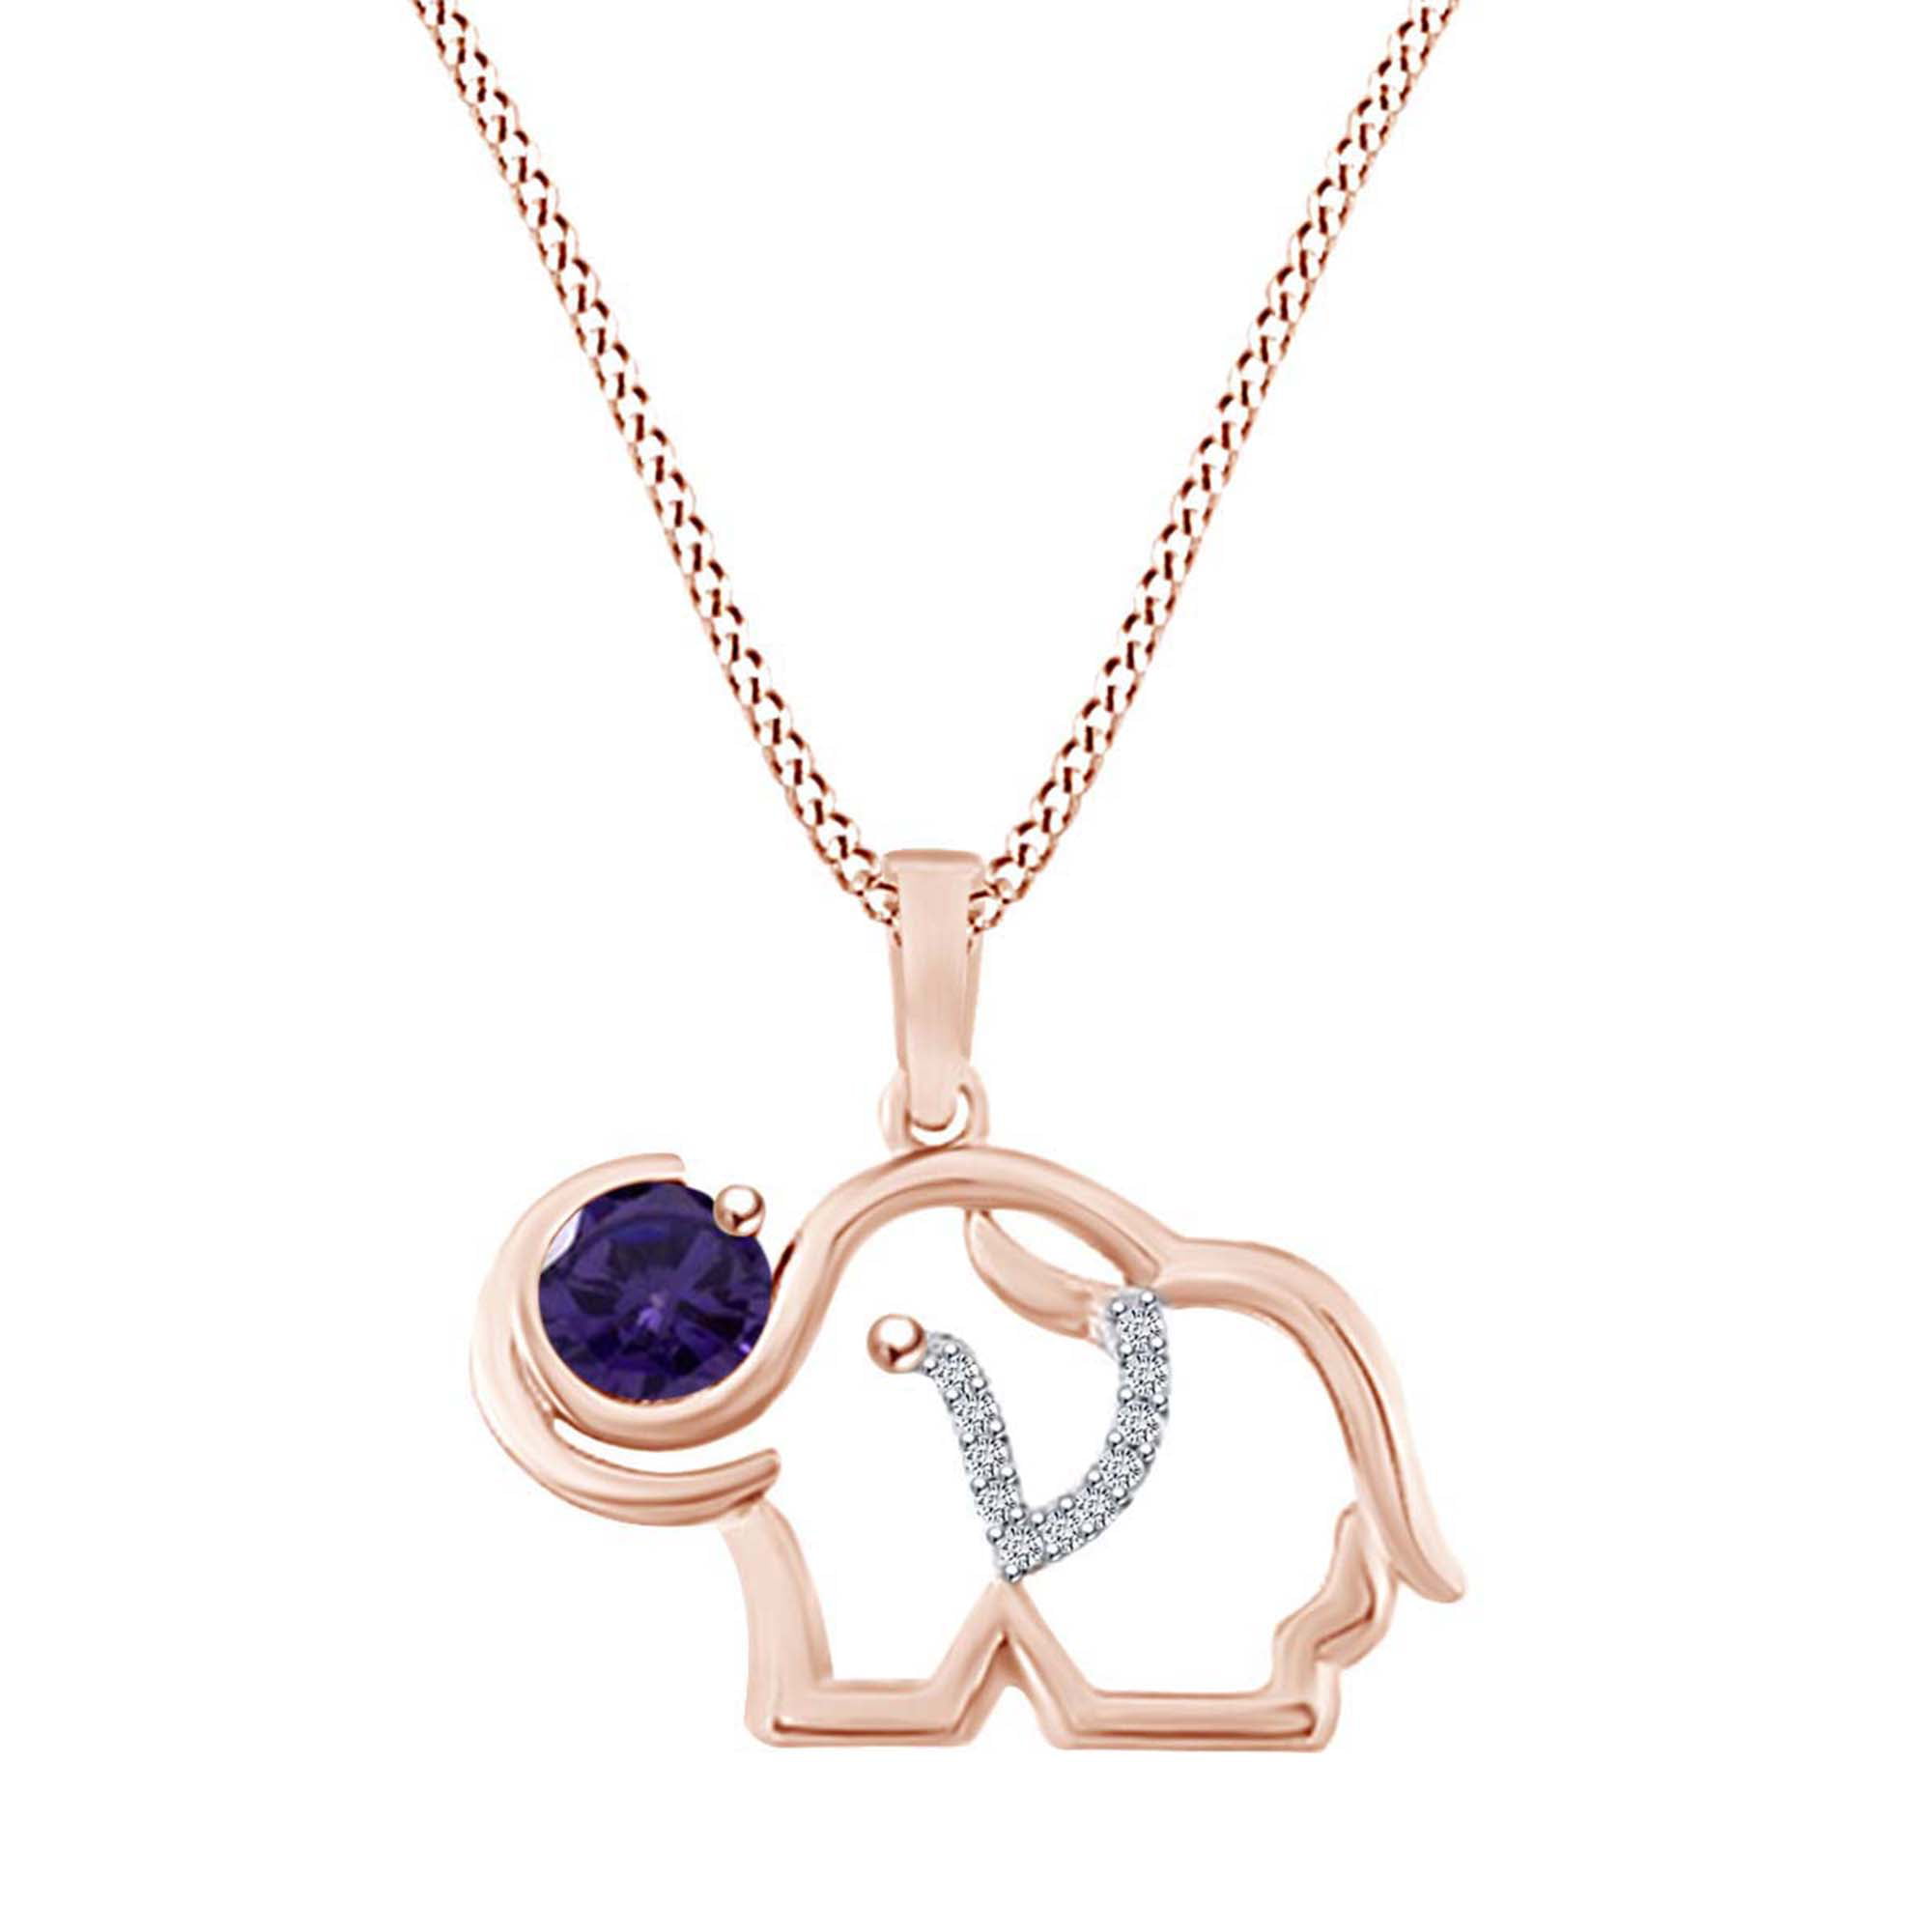 Wishrocks Round Cut Simulated Pink & Blue Sapphire Sterling Silver Butterfly Pendant Necklace 